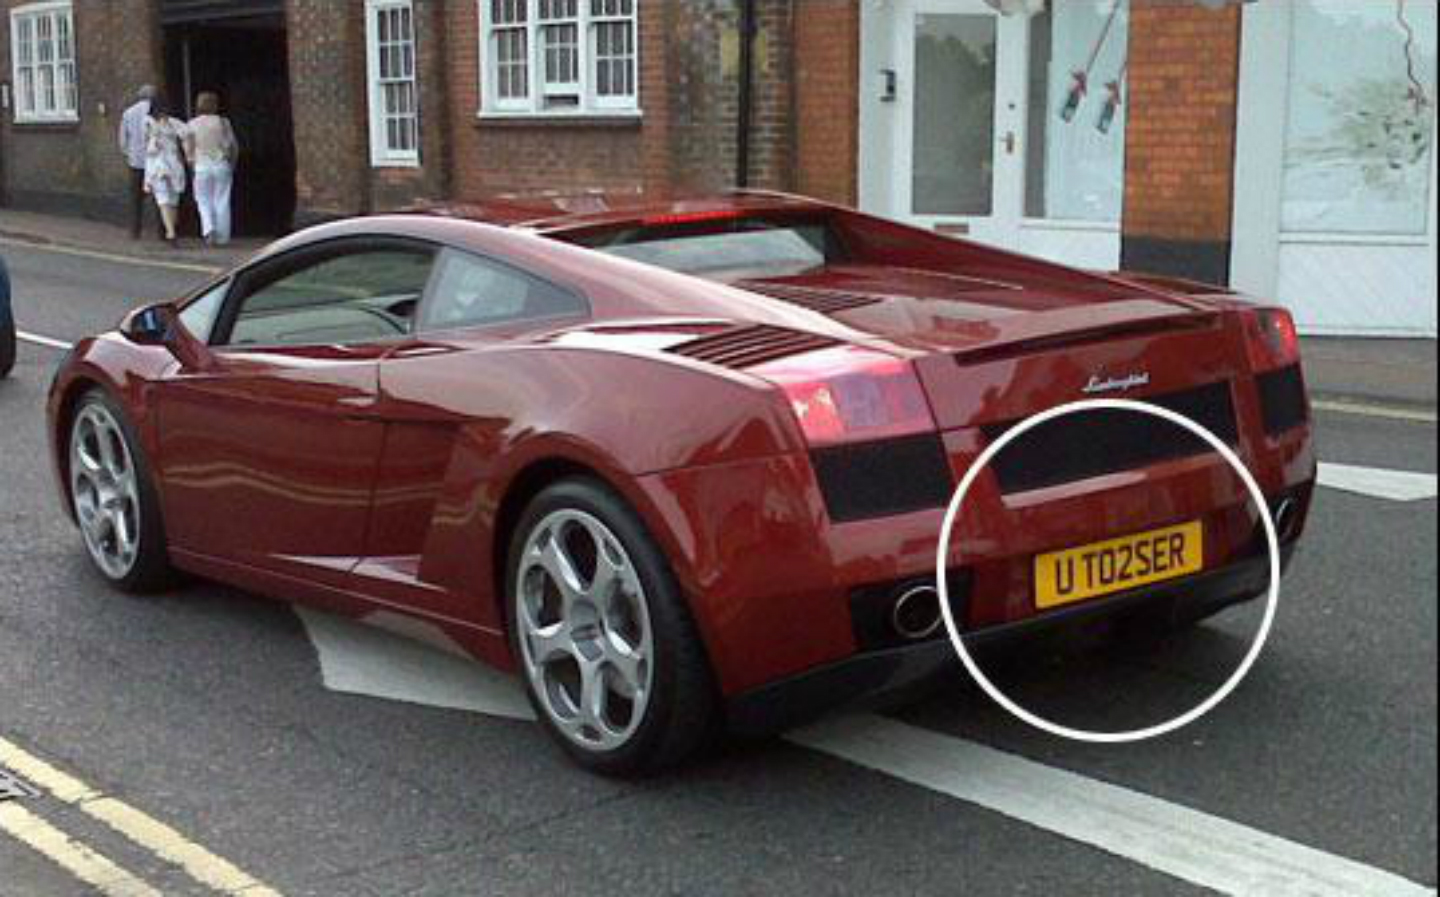 10 of the rudest numberplates spotted on Britain's roads